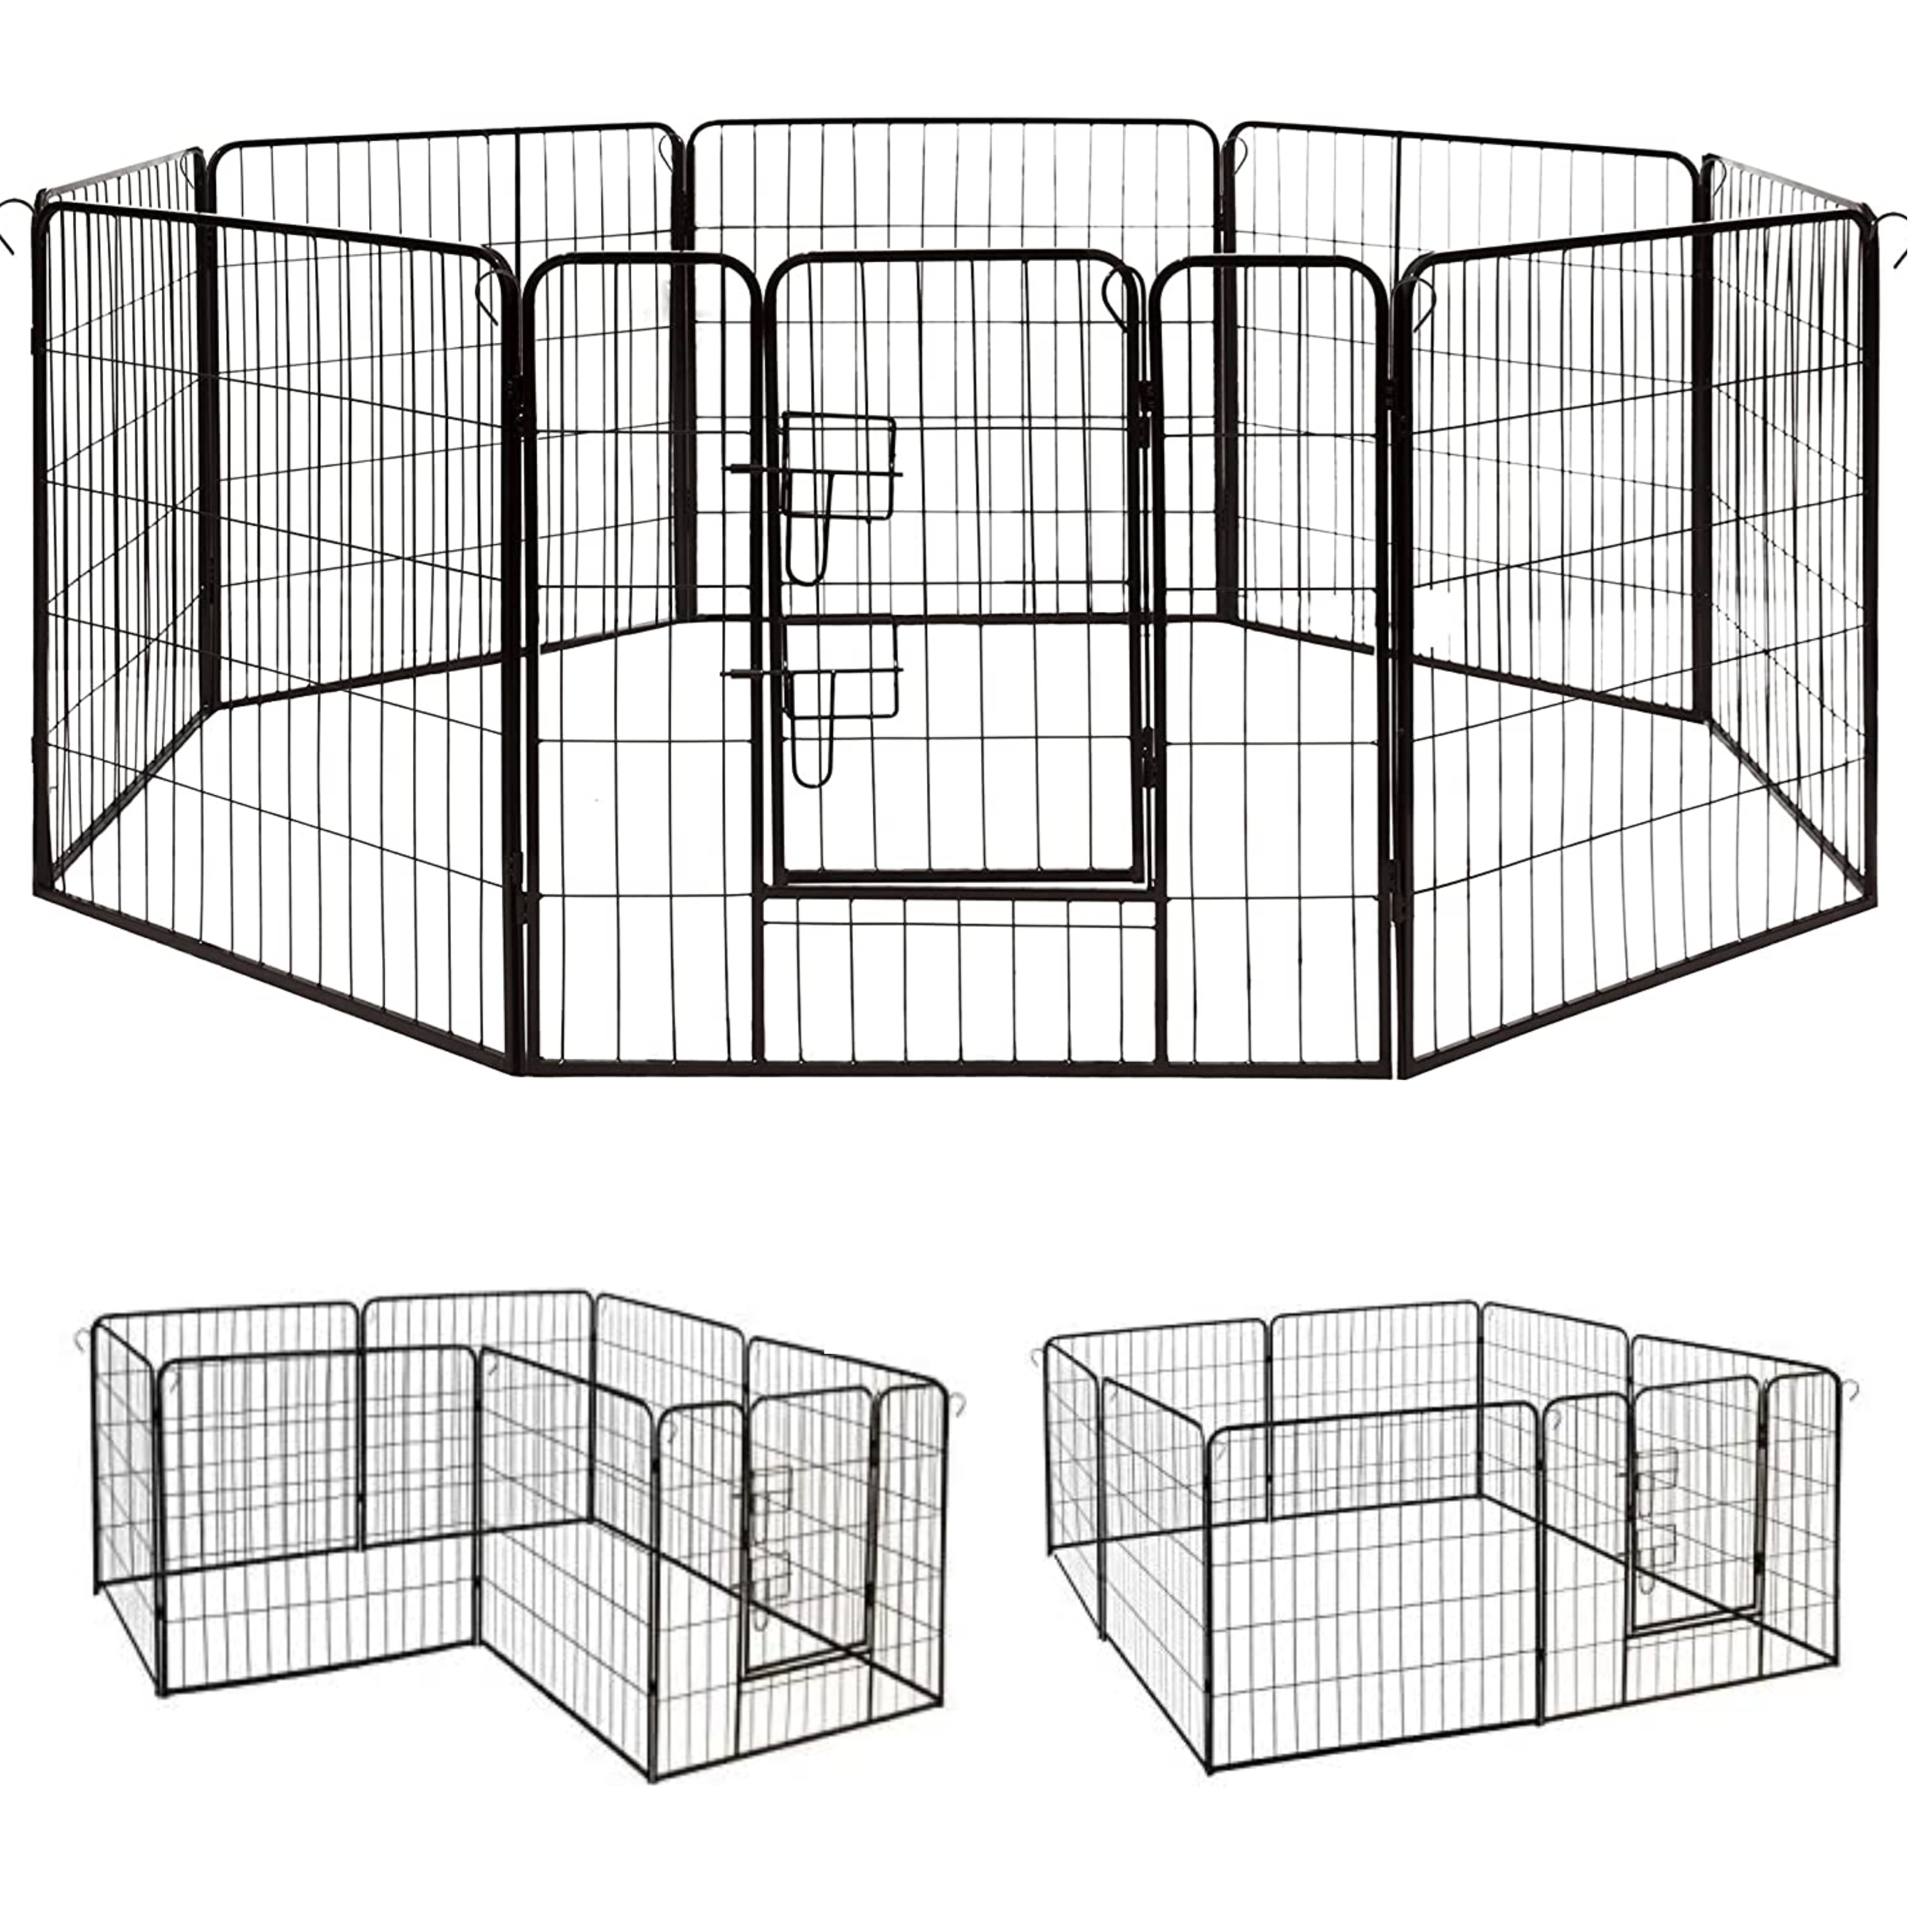 Picture of Aleko DK32X32-UNB 32 x 32 in. Heavy Duty Pet Playpen Dog Kennel Pen Exercise Cage Fence - 8 Panel